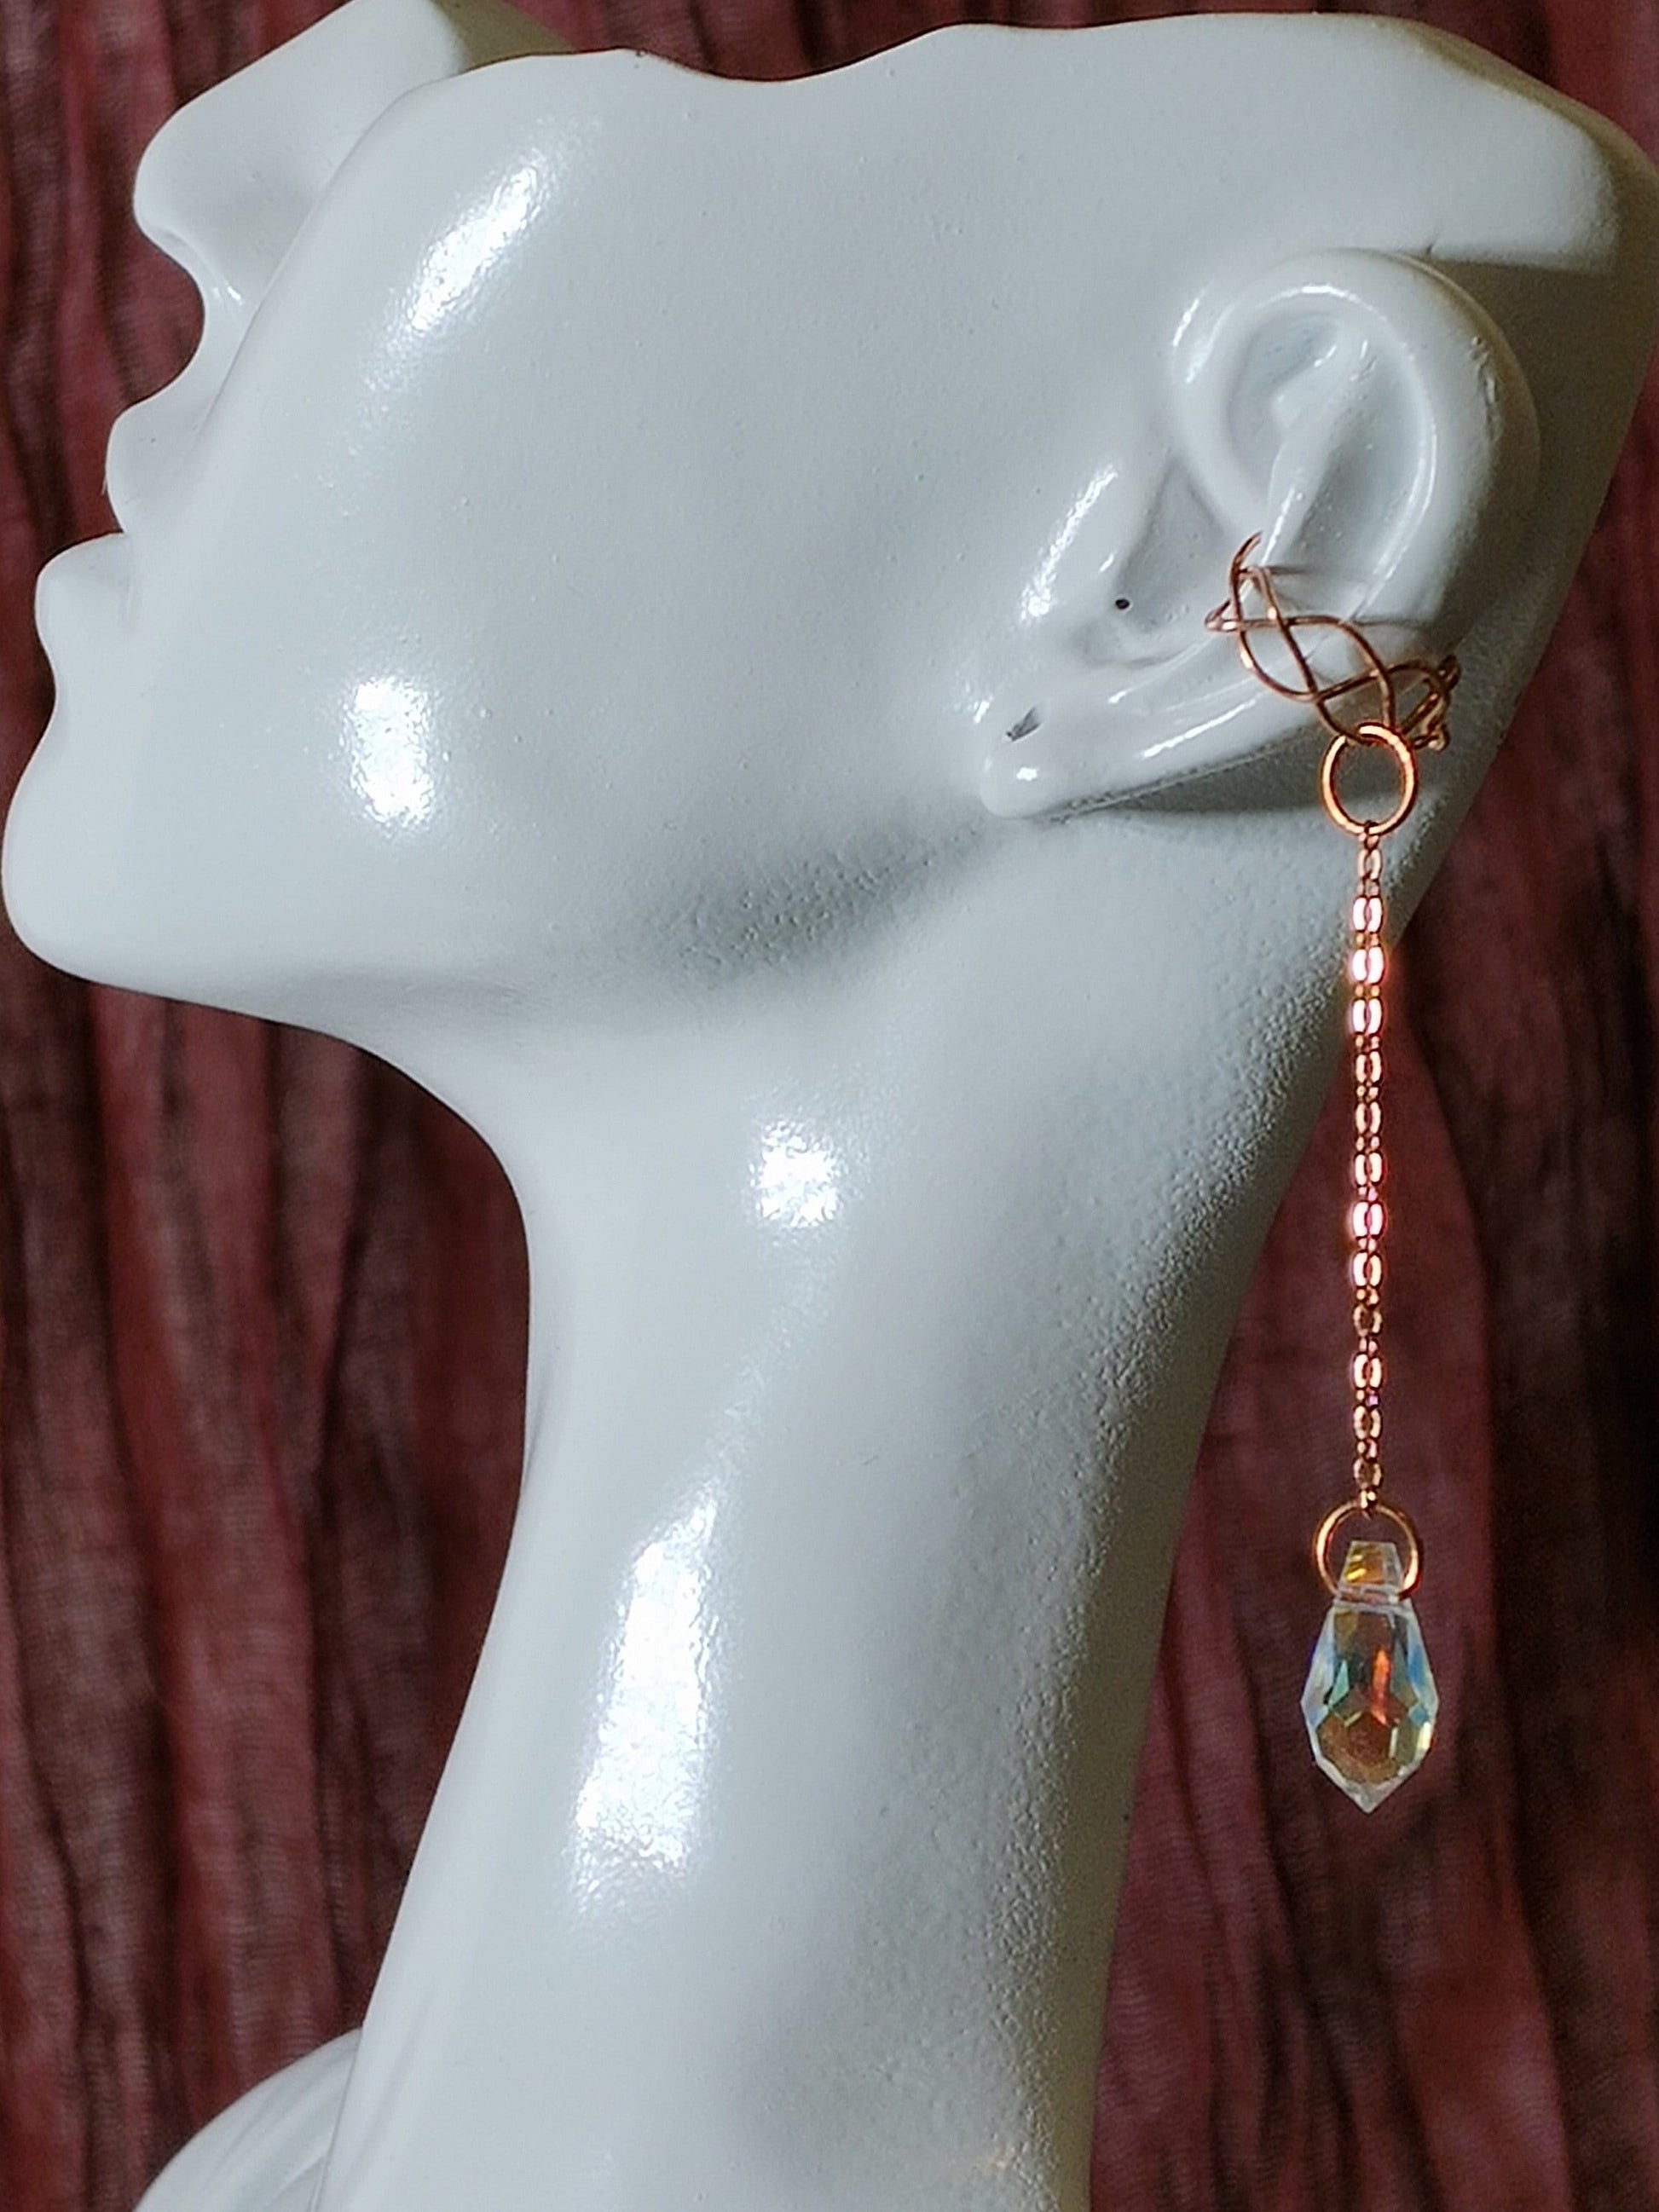 Ear Cuff No Piercing With Chain Crystal Dangle | Earcuff No Piercing Required | Whimsigoth Jewelry | Upper Ear Cuff | Fairycore Aesthetic